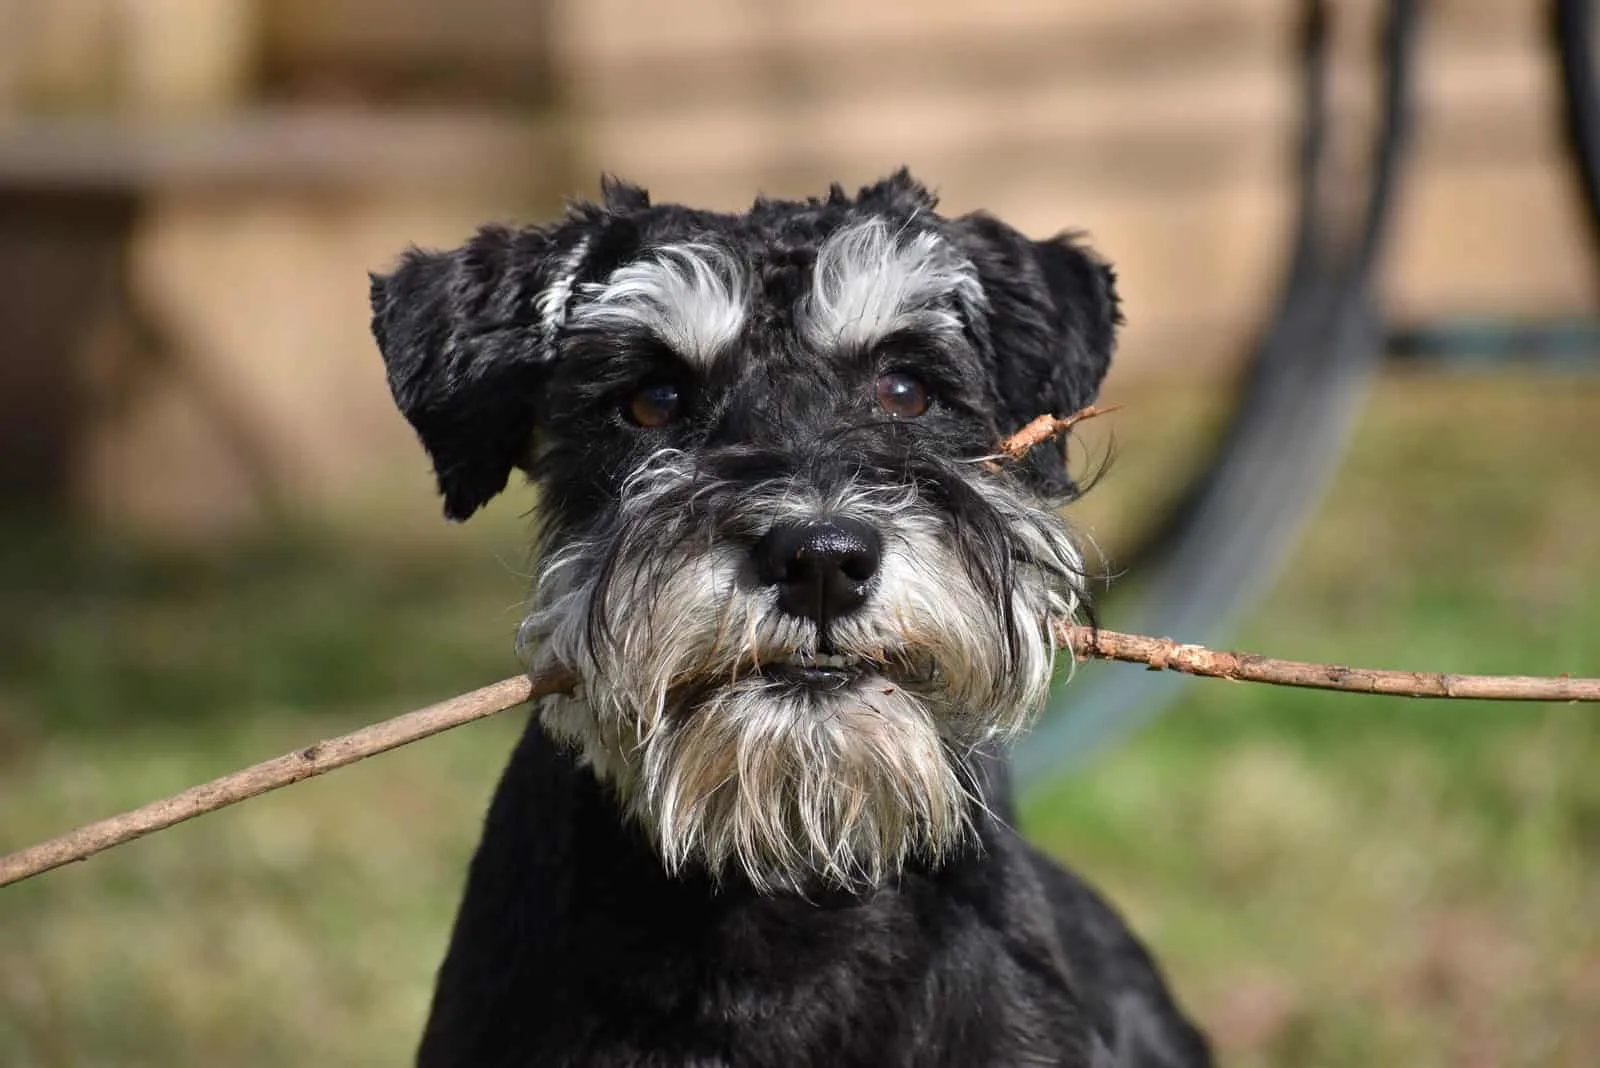 Miniature Schnauzer holding a piece of wood in mouth